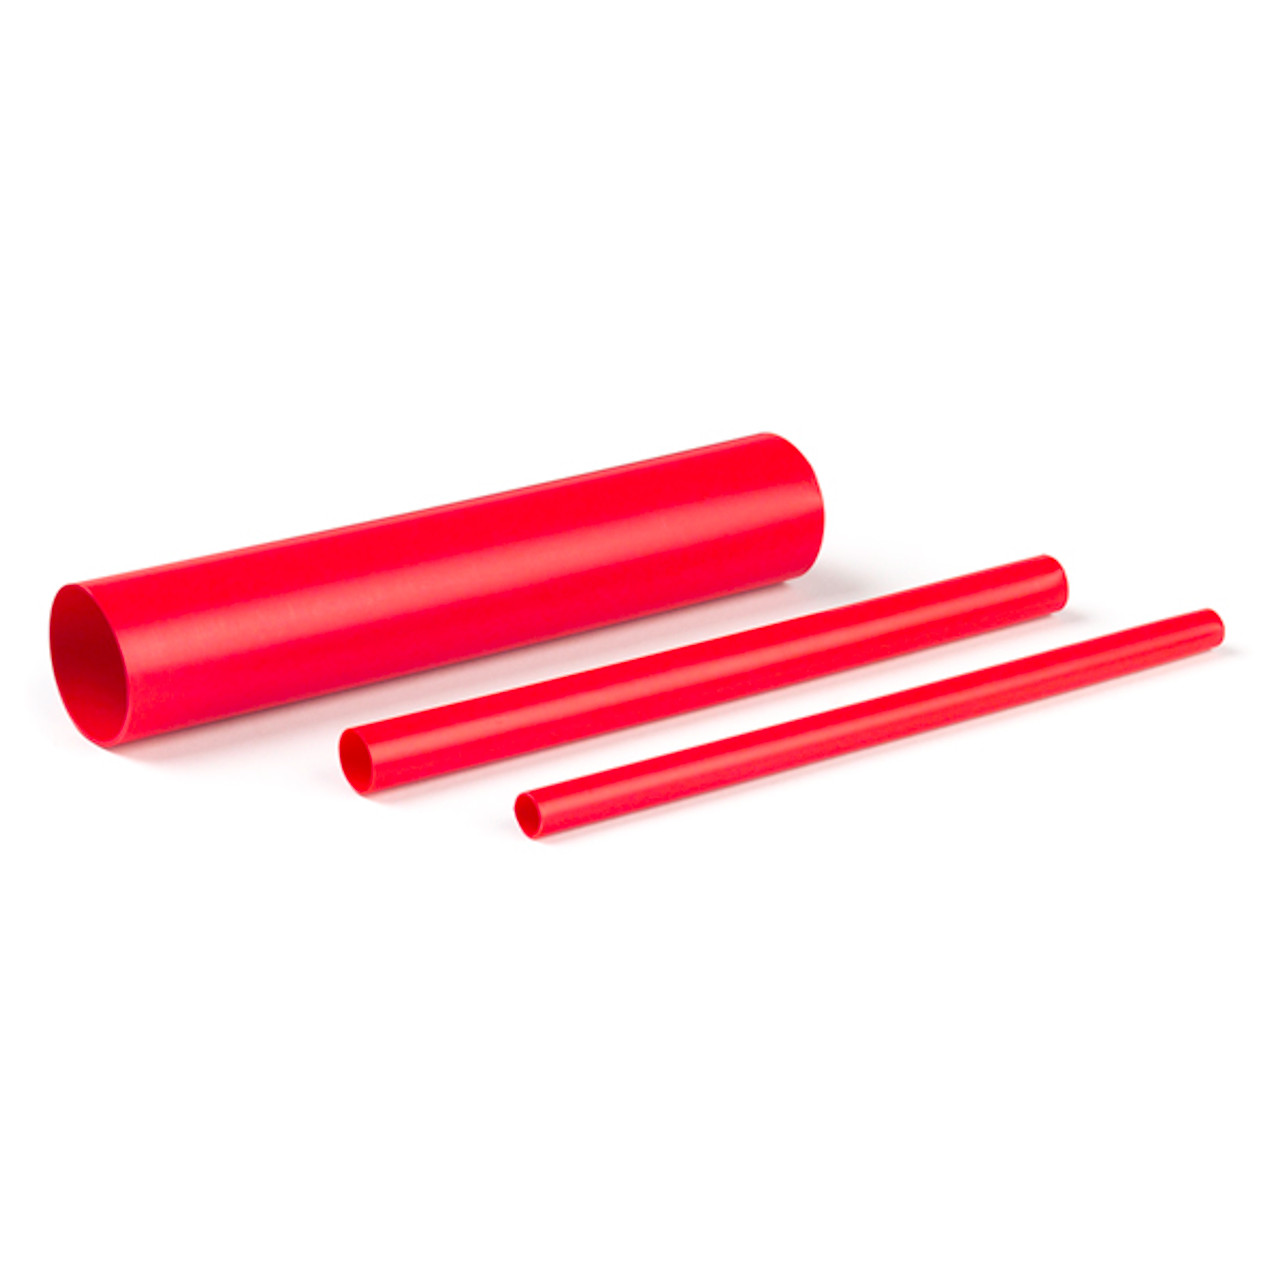 3/8" Dual Wall 3:1 Heat Shrink Tubing 6" @ 20 Pack - Red  84-6101-3